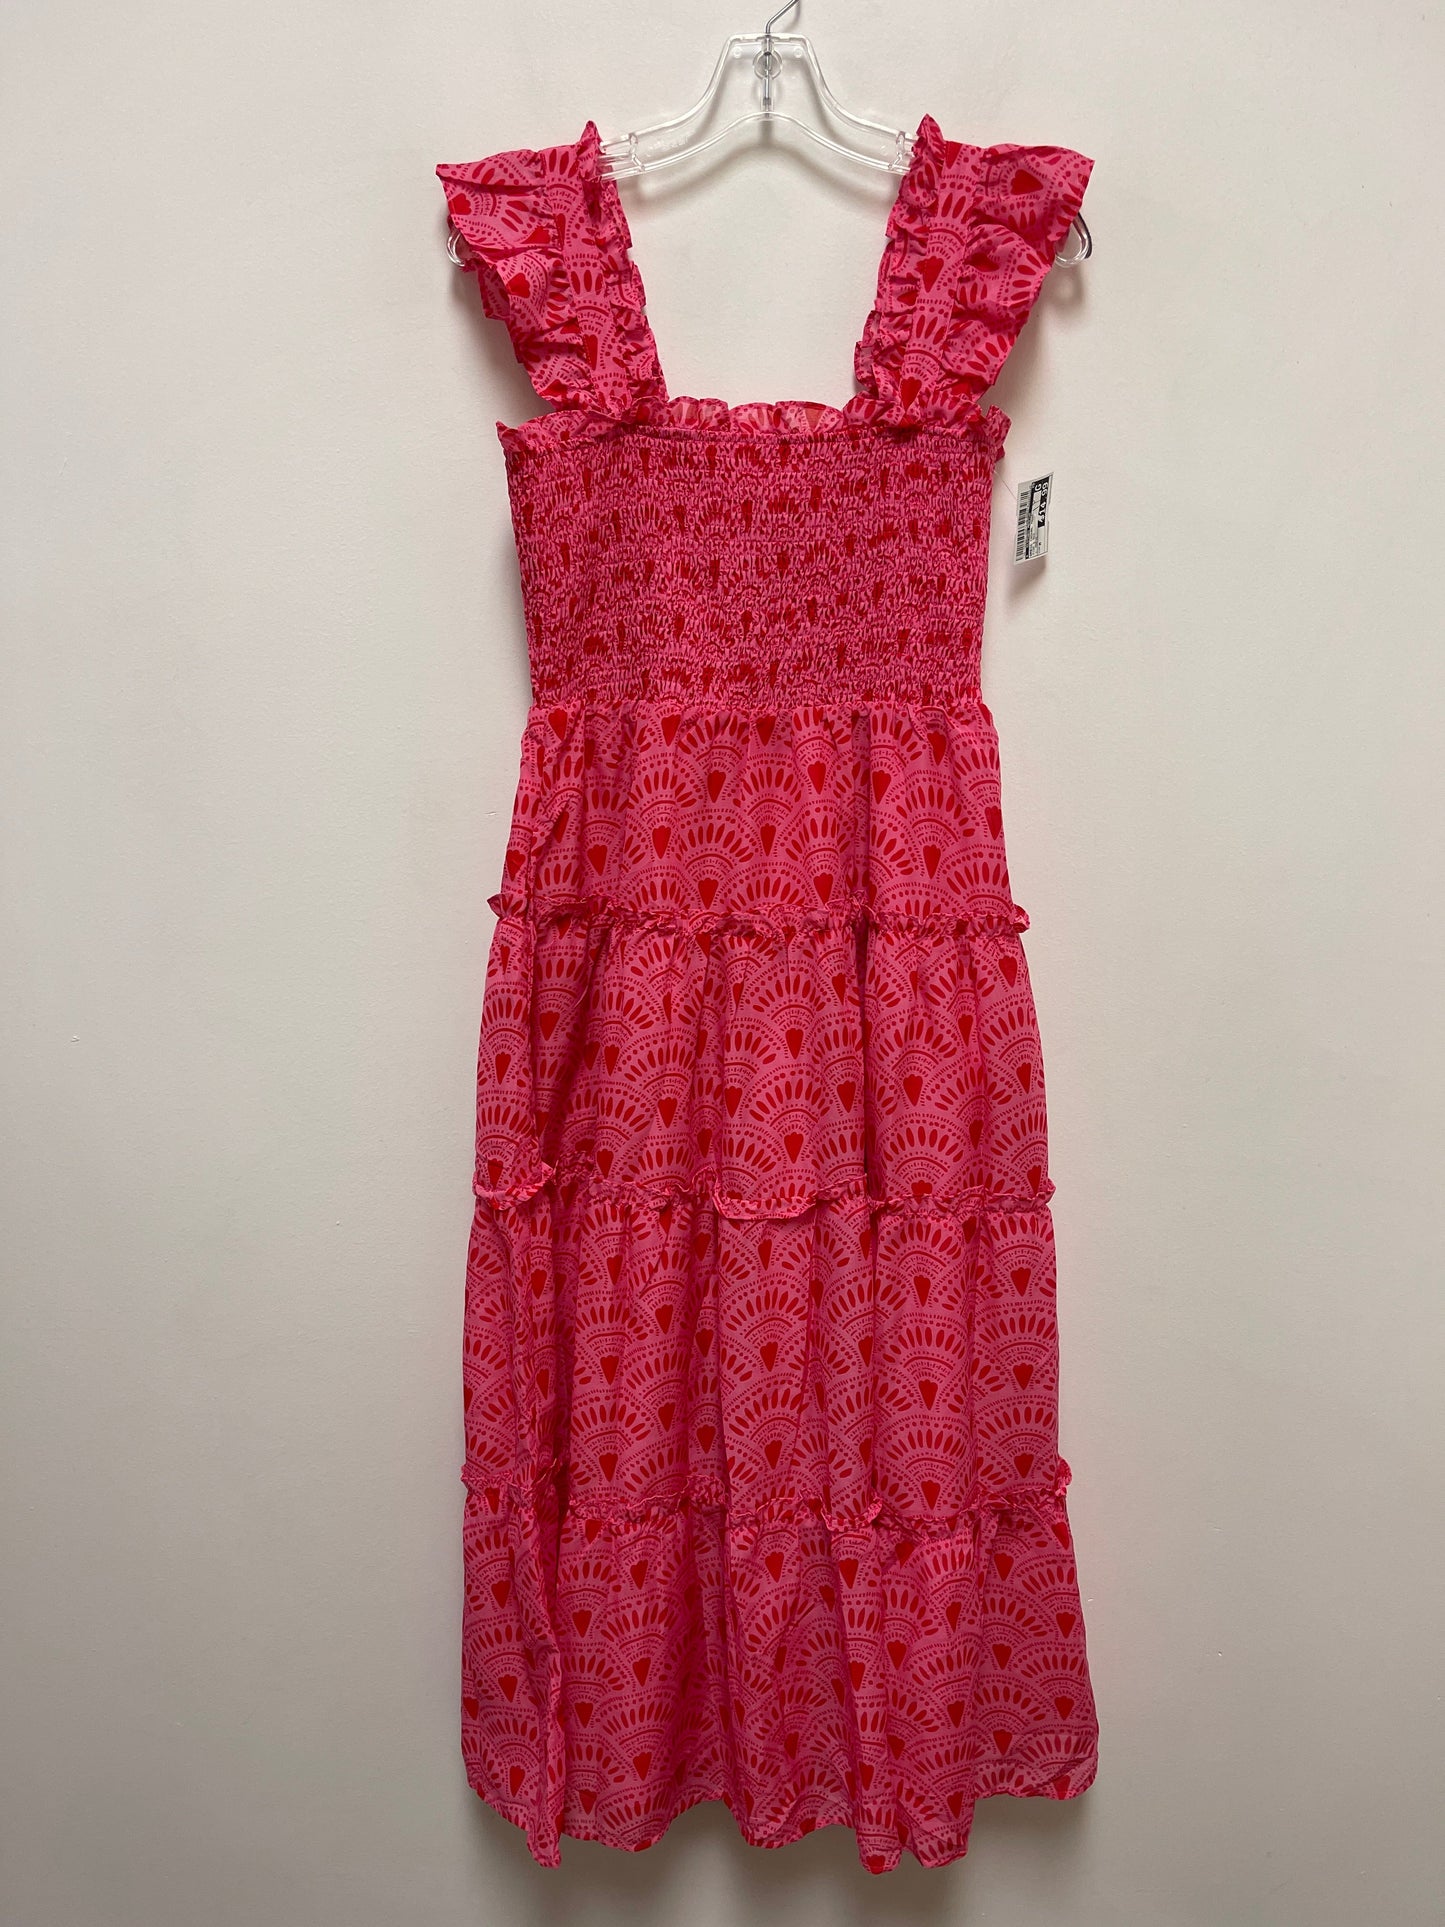 Pink & Red Dress Casual Maxi Clothes Mentor, Size M